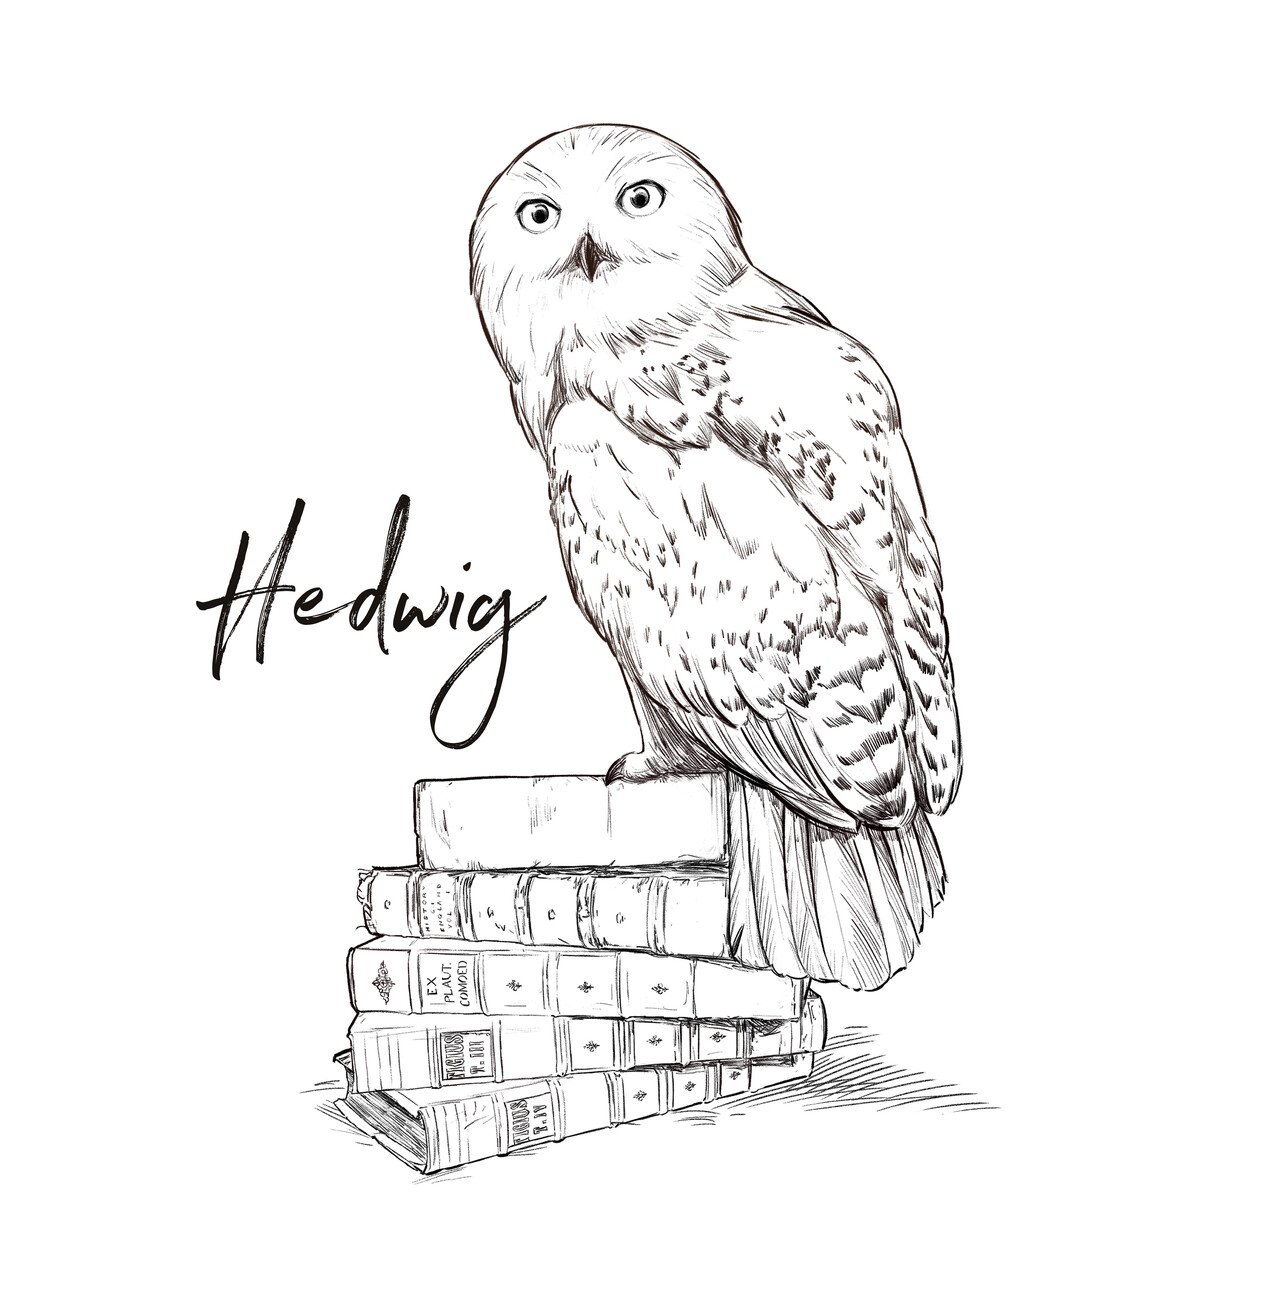 Harry Potter - Hedwig | Clothes and accessories for merchandise fans